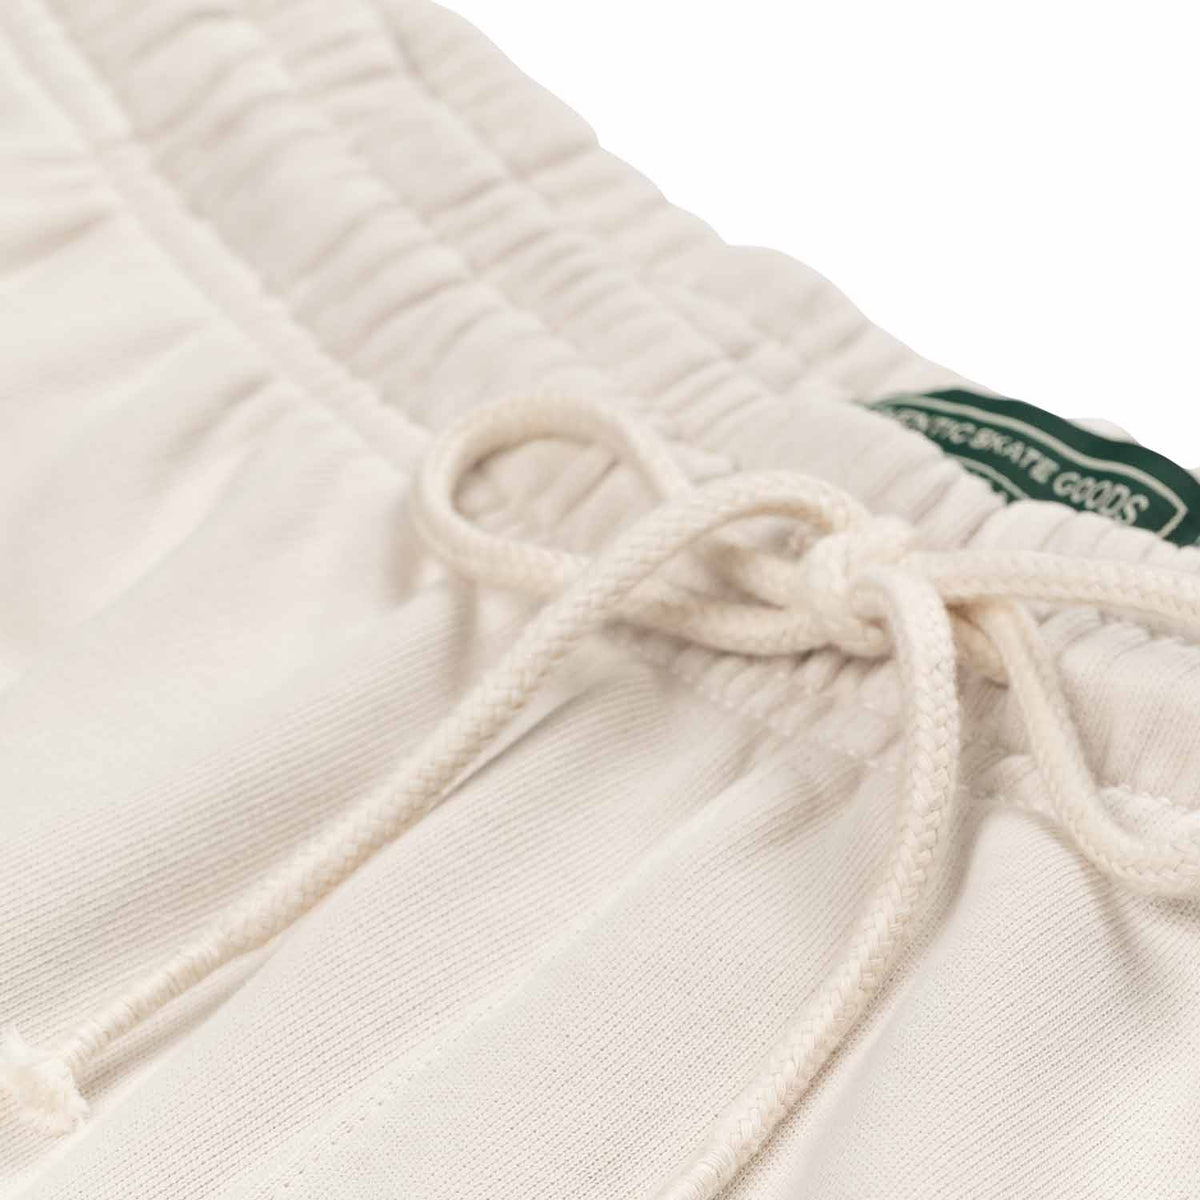 Polo Ralph Lauren x Element Sweatpants in cream with draw string at waist. Close up of draw string.